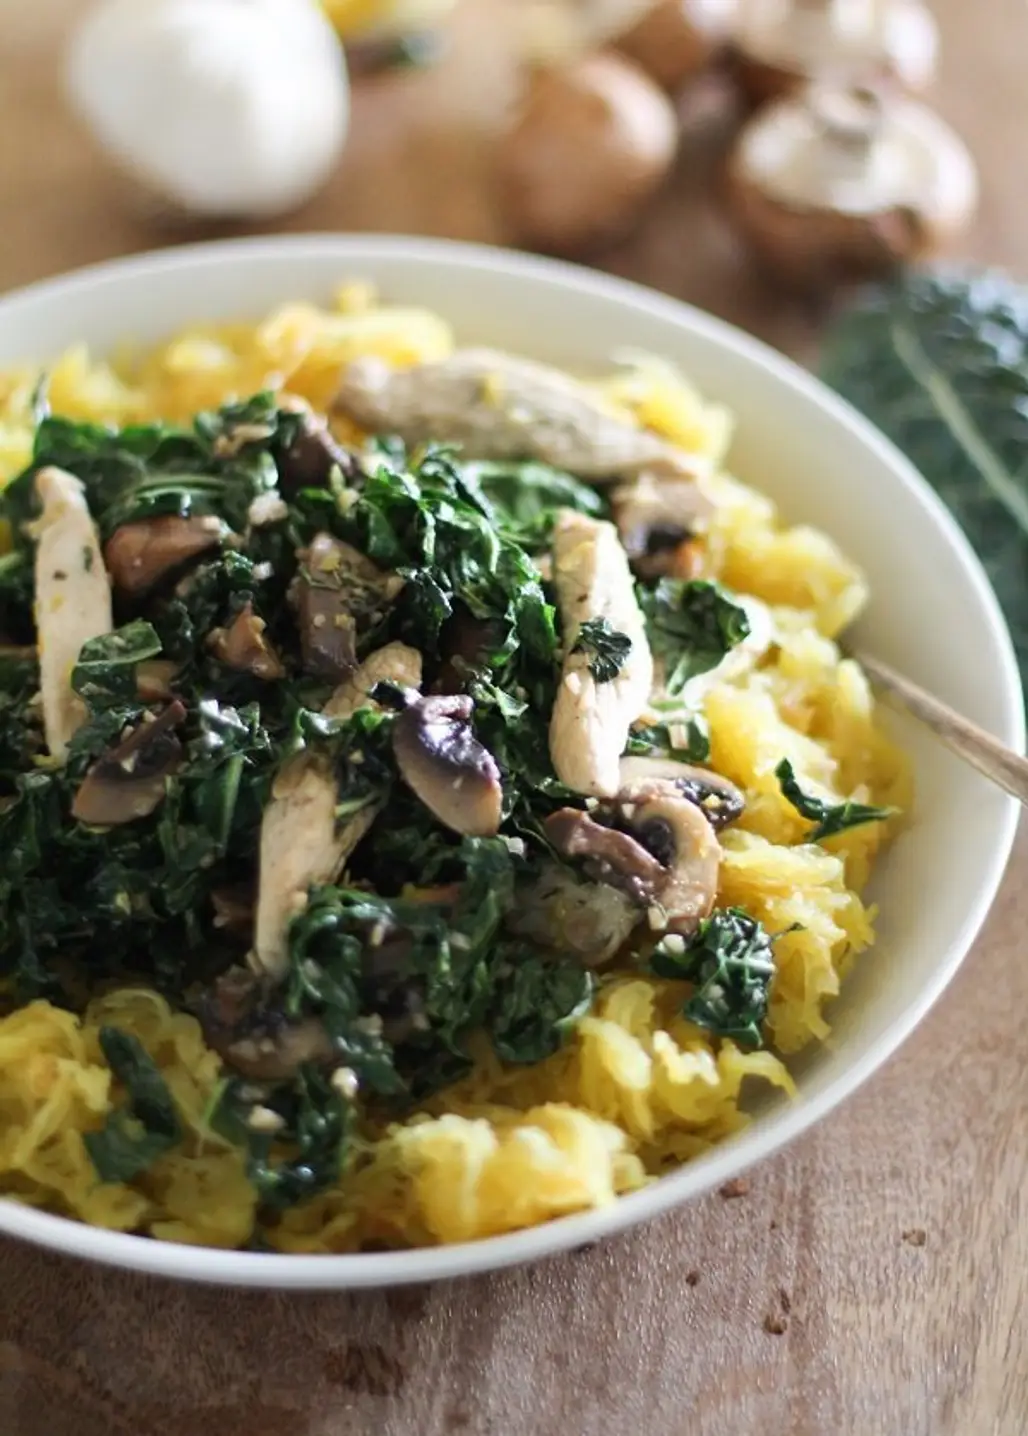 GARLICKY SPAGHETTI SQUASH with CHICKEN, MUSHROOMS, and KALE